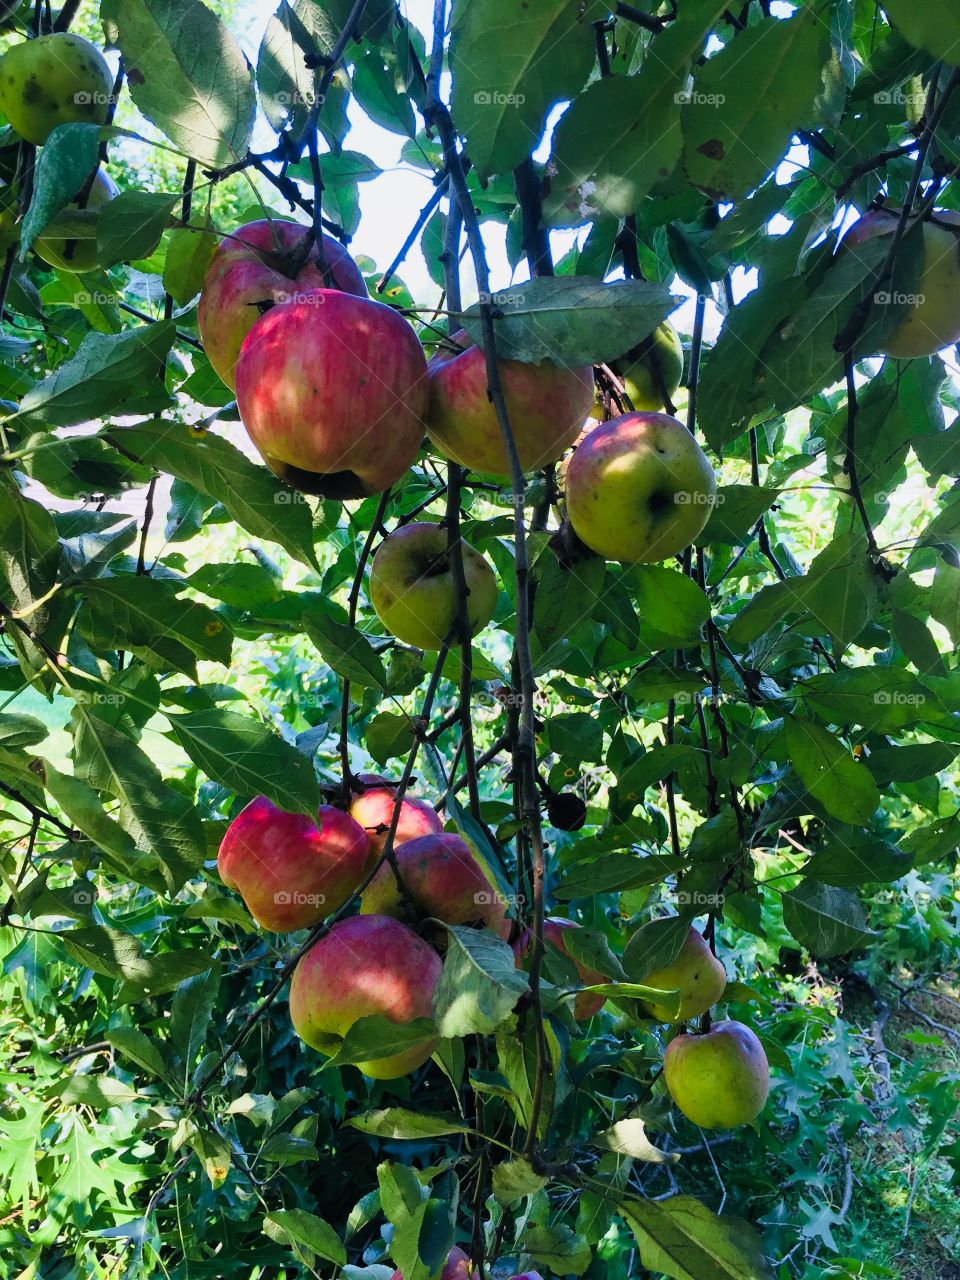 Apples fresh on the tree ready for picking 